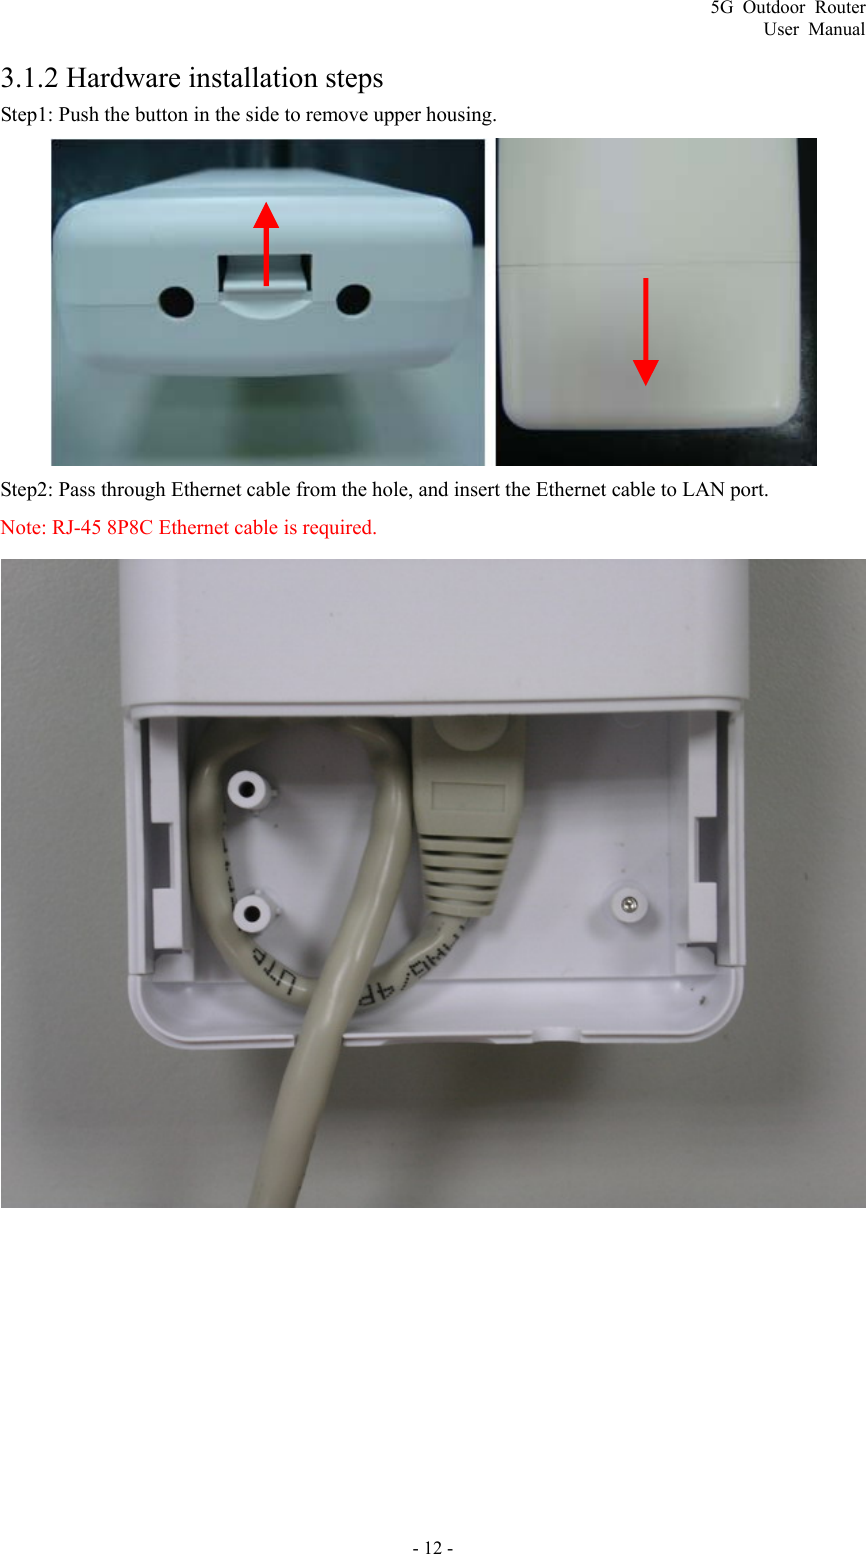 5G Outdoor Router User Manual - 12 - 3.1.2 Hardware installation steps Step1: Push the button in the side to remove upper housing.  Step2: Pass through Ethernet cable from the hole, and insert the Ethernet cable to LAN port. Note: RJ-45 8P8C Ethernet cable is required.   